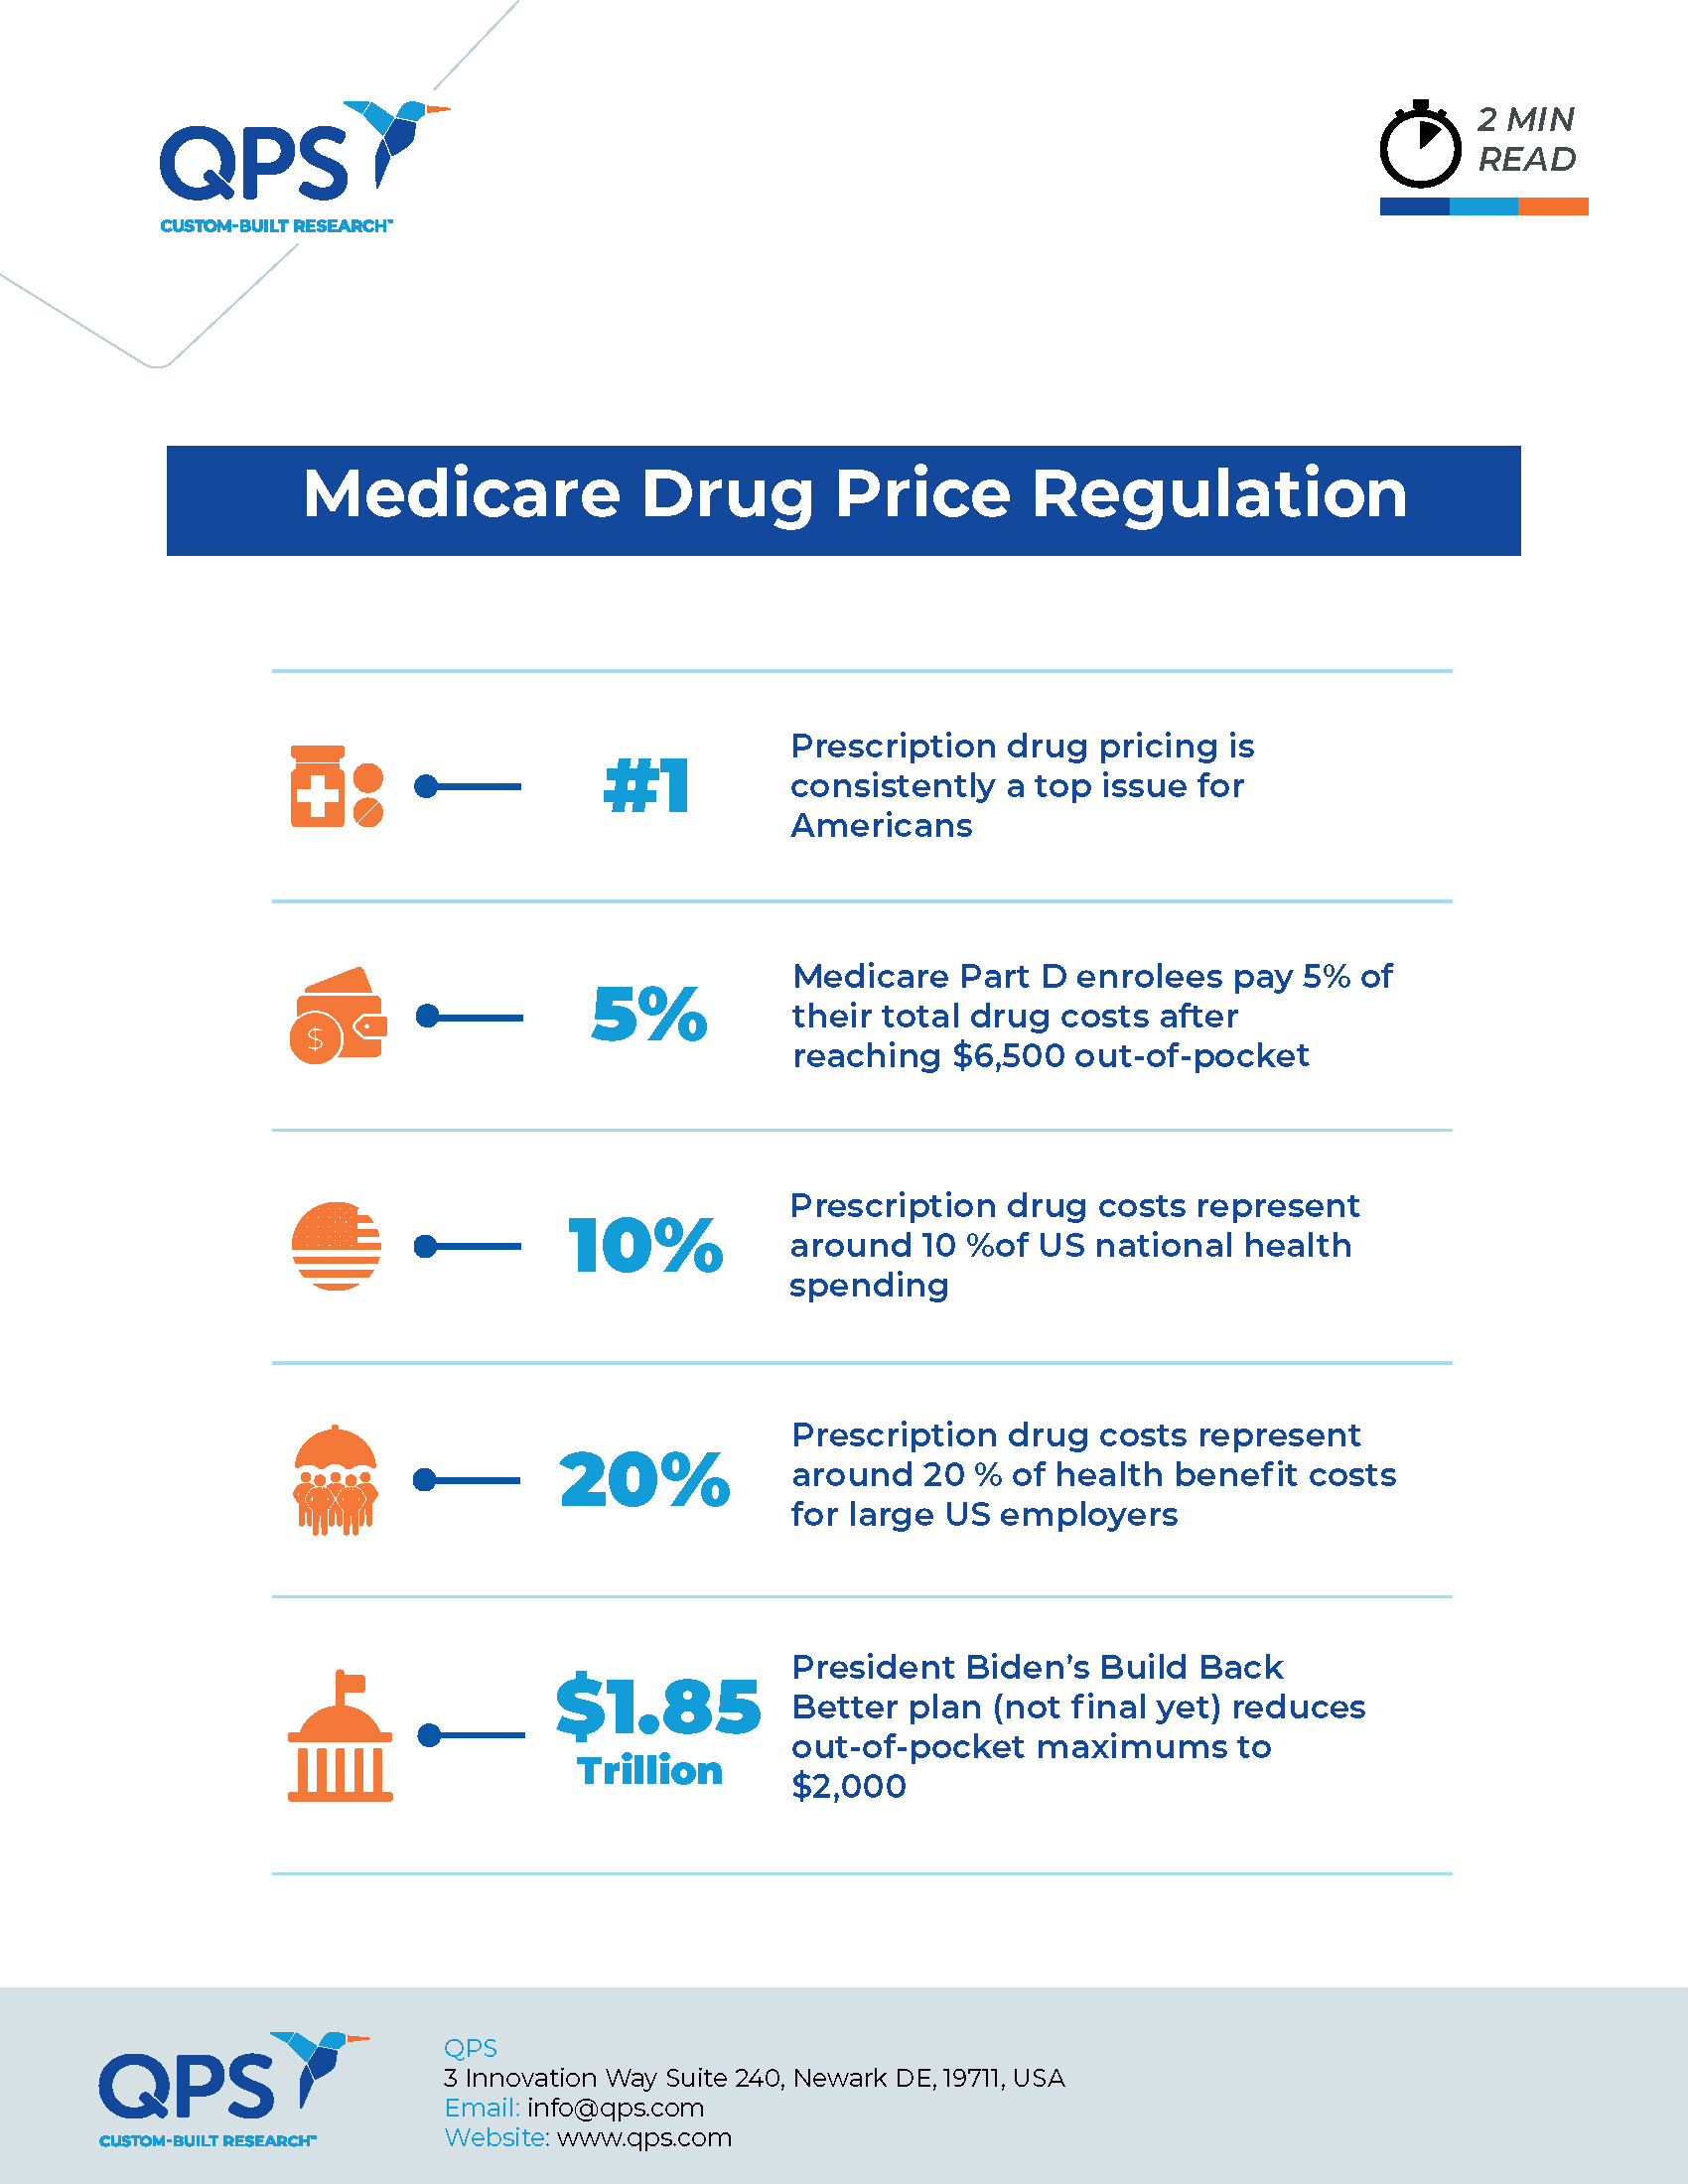 How Congress Could Regulate Medicare Drug Prices